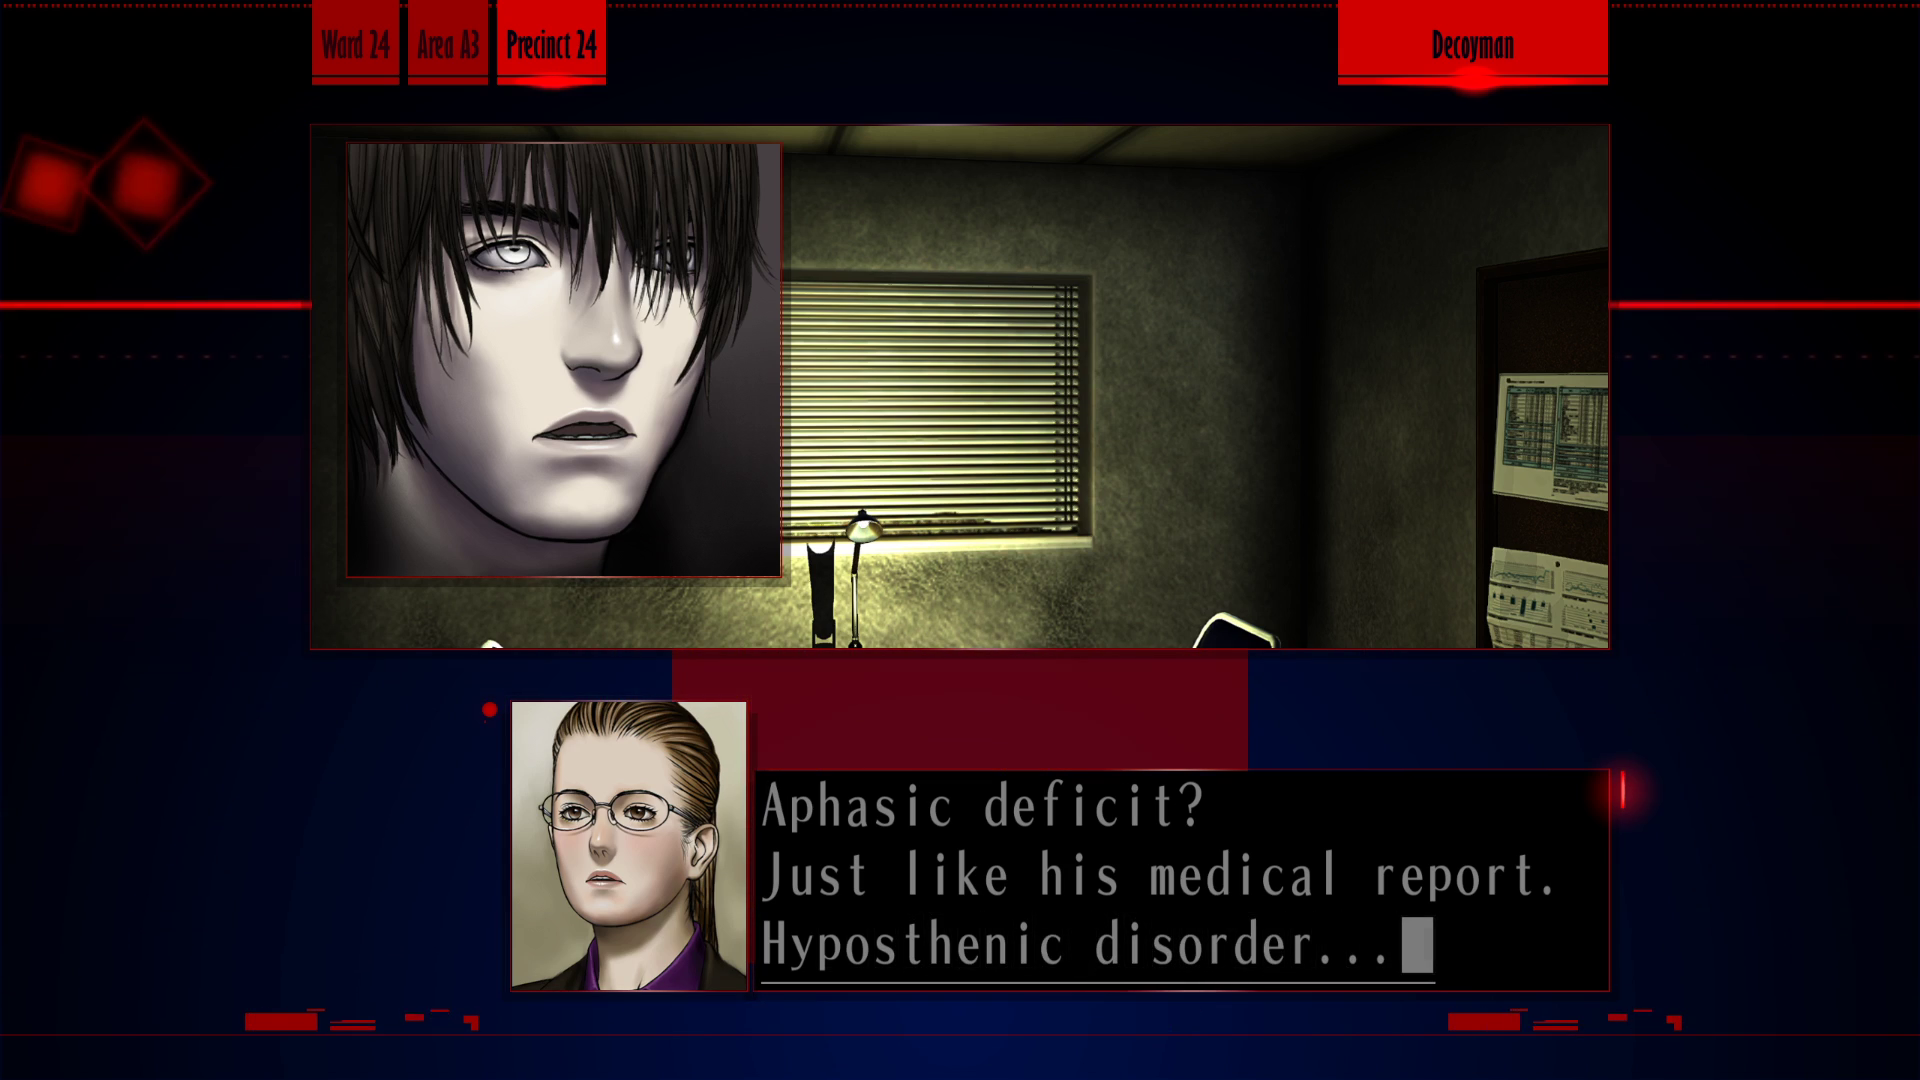 Screenshot from "Decoyman." The window shows the Precinct 23 interrogation room. The character portrait in the window shows Fujiwara, eyes lolling, staring into space. Chizuru says, "Aphasic deficit? Just like this medical report. Hyposthenic disorder..."